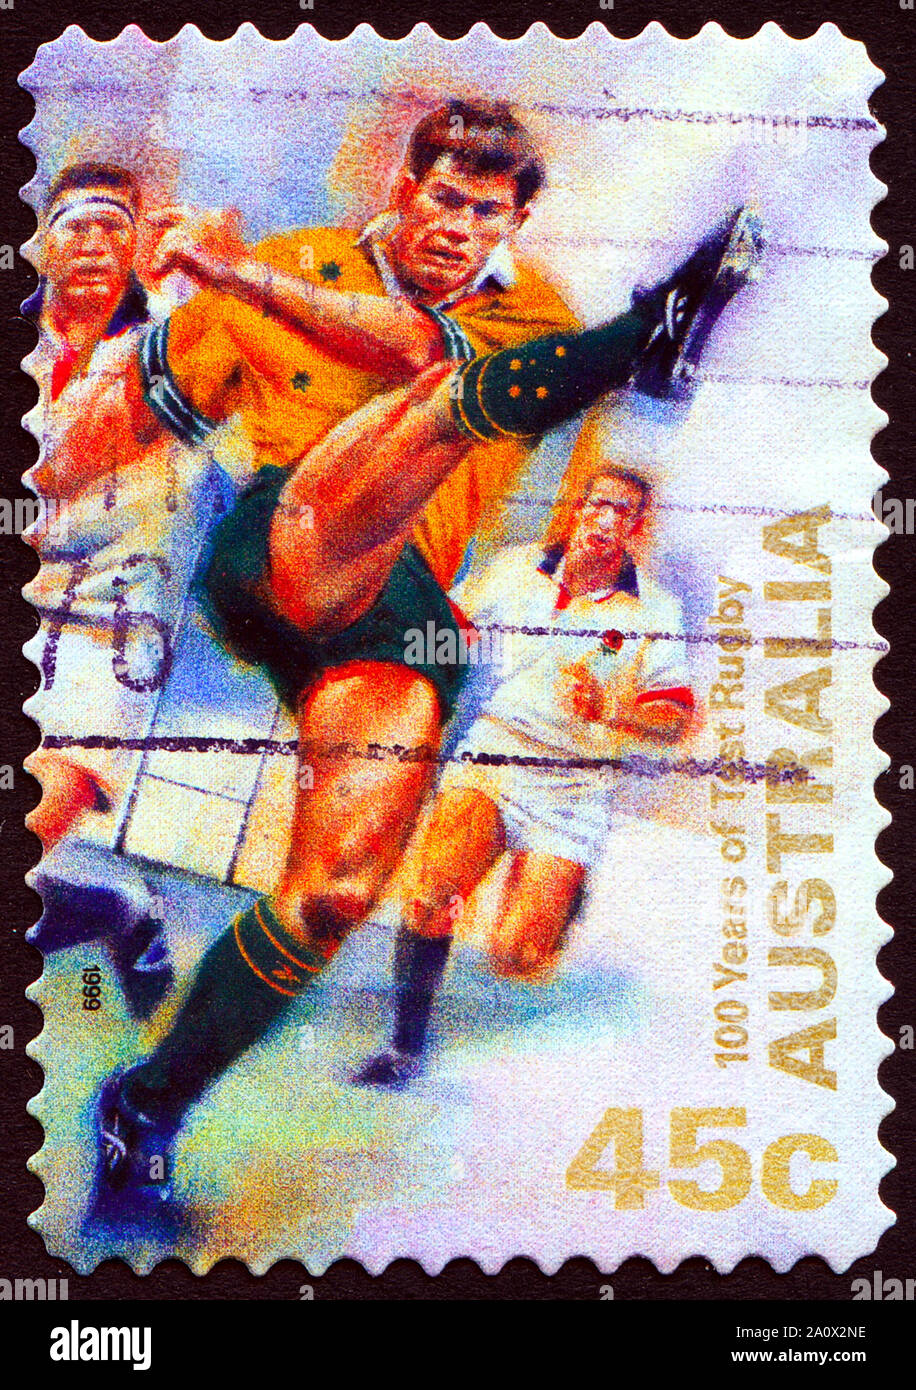 100 Years of Test Rugby, postage stamp, Australia, 1999 Stock Photo